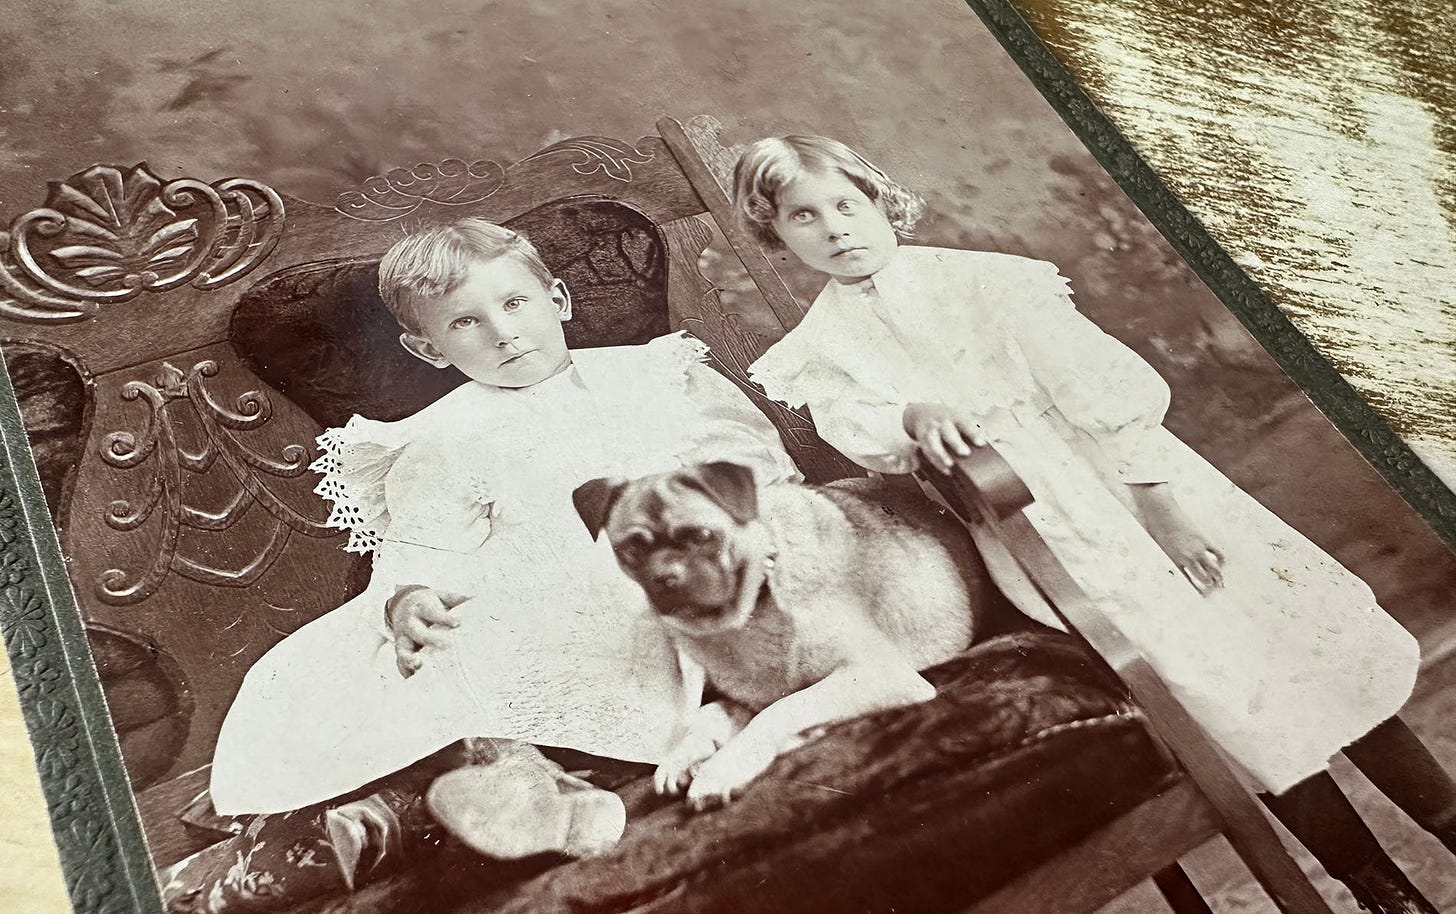 Photograph, taken at an angle, of the Cabinet Card studio portrait of the children and dog that I did my drawings from